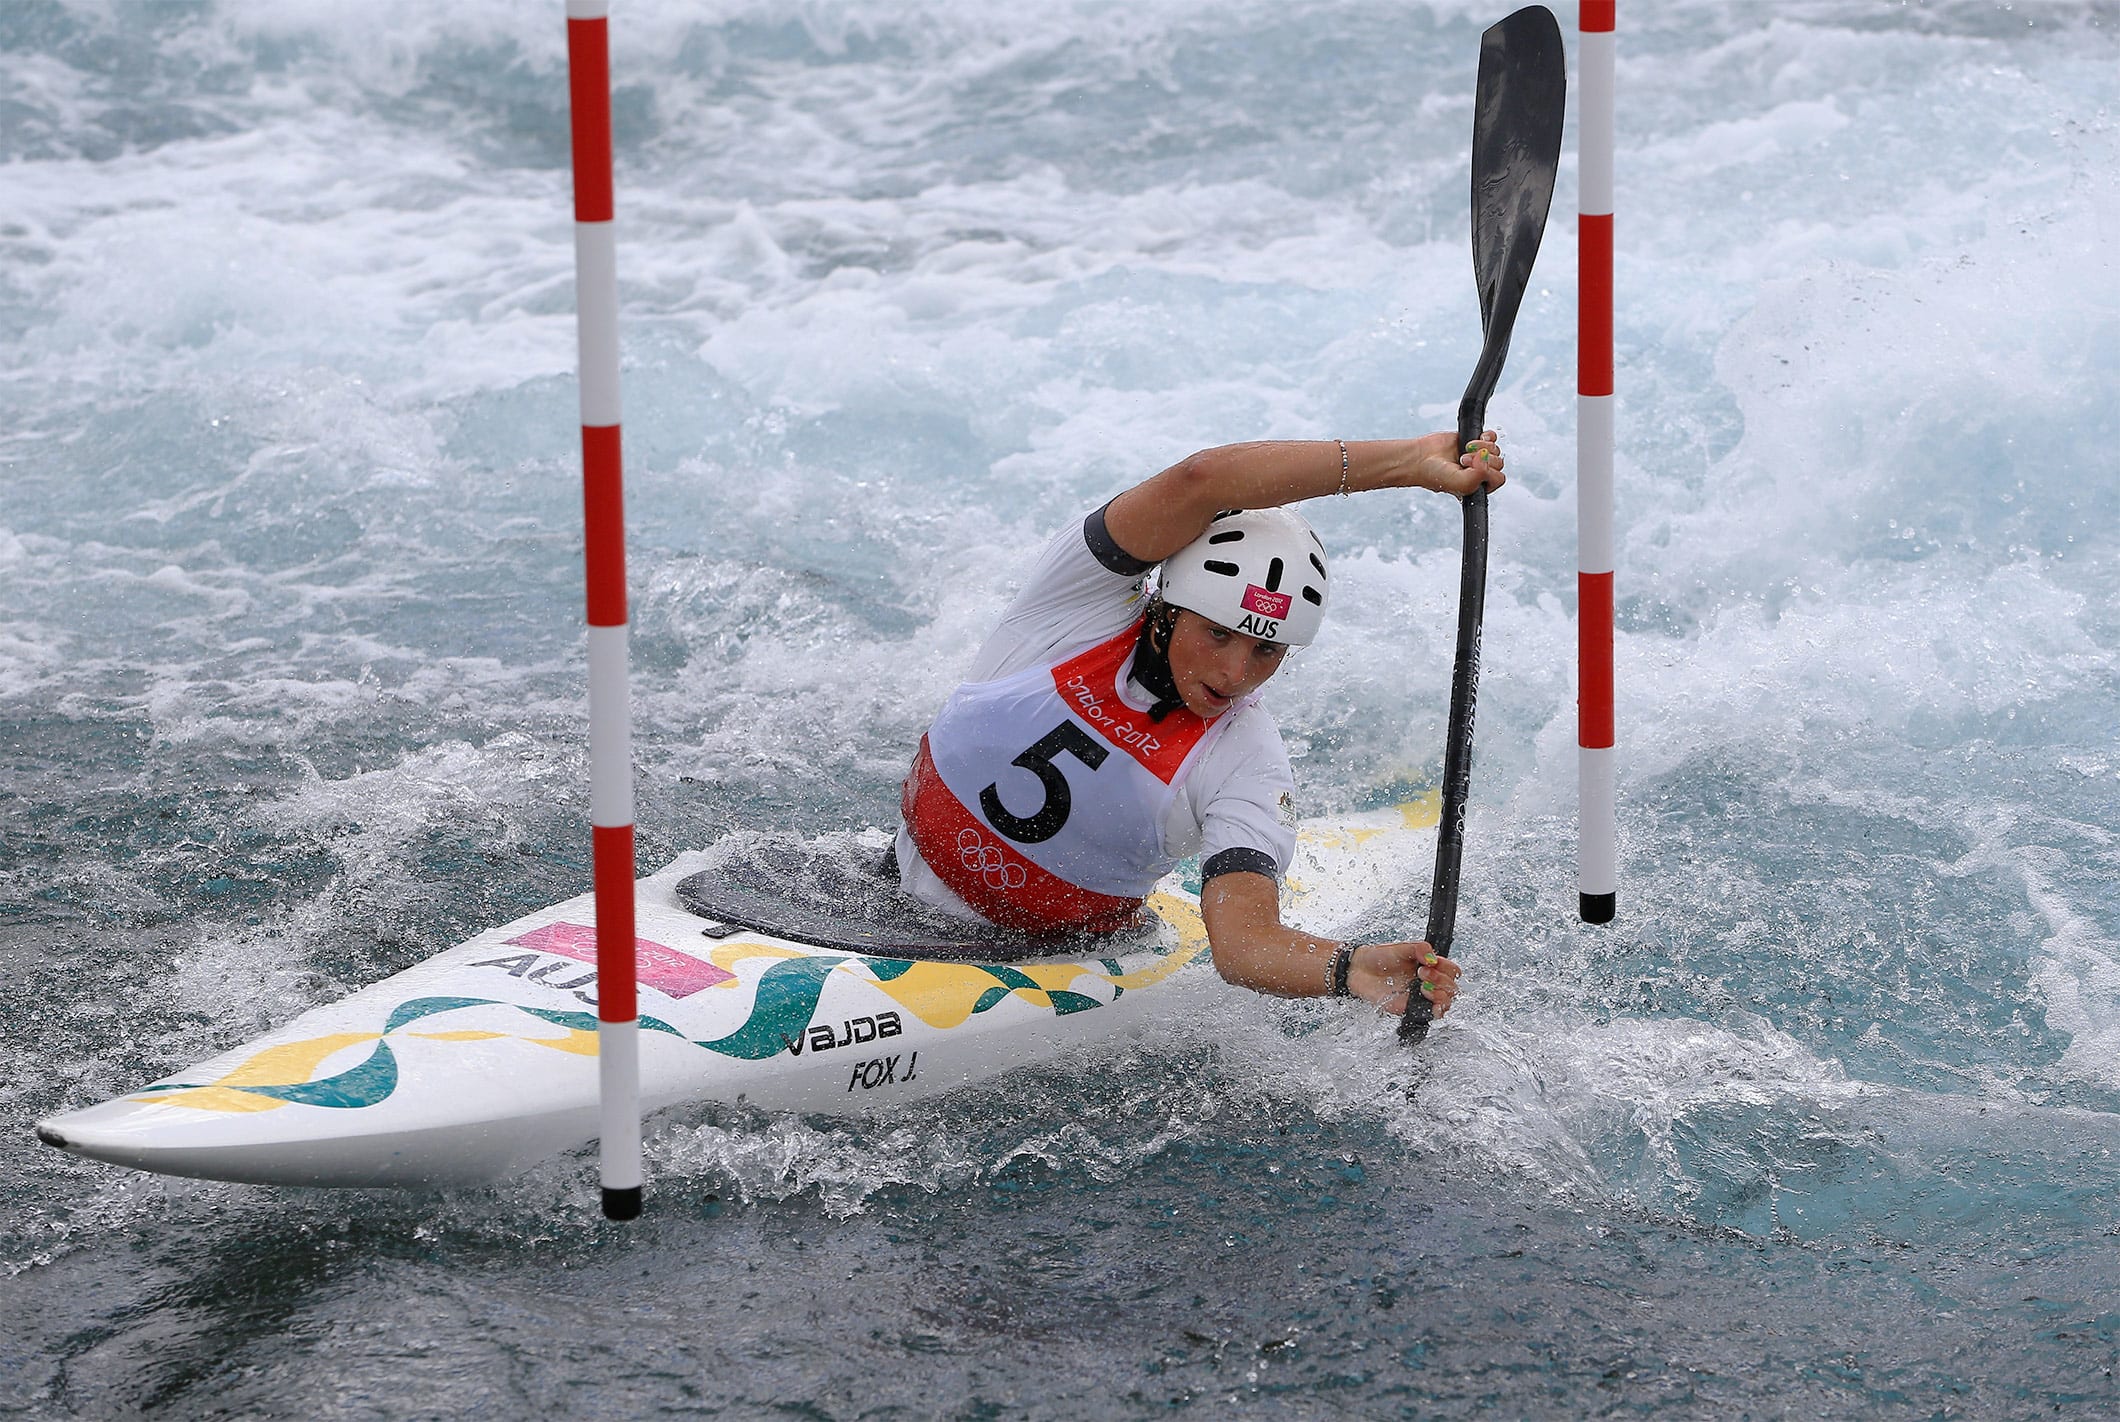 Jessica Fox of Australia competes in the Women's Kayak Single  Slalom on Day 6 of the London 2012 Olympic Games at Lee Valley White Water Centre on August 2, 2012 in London, England